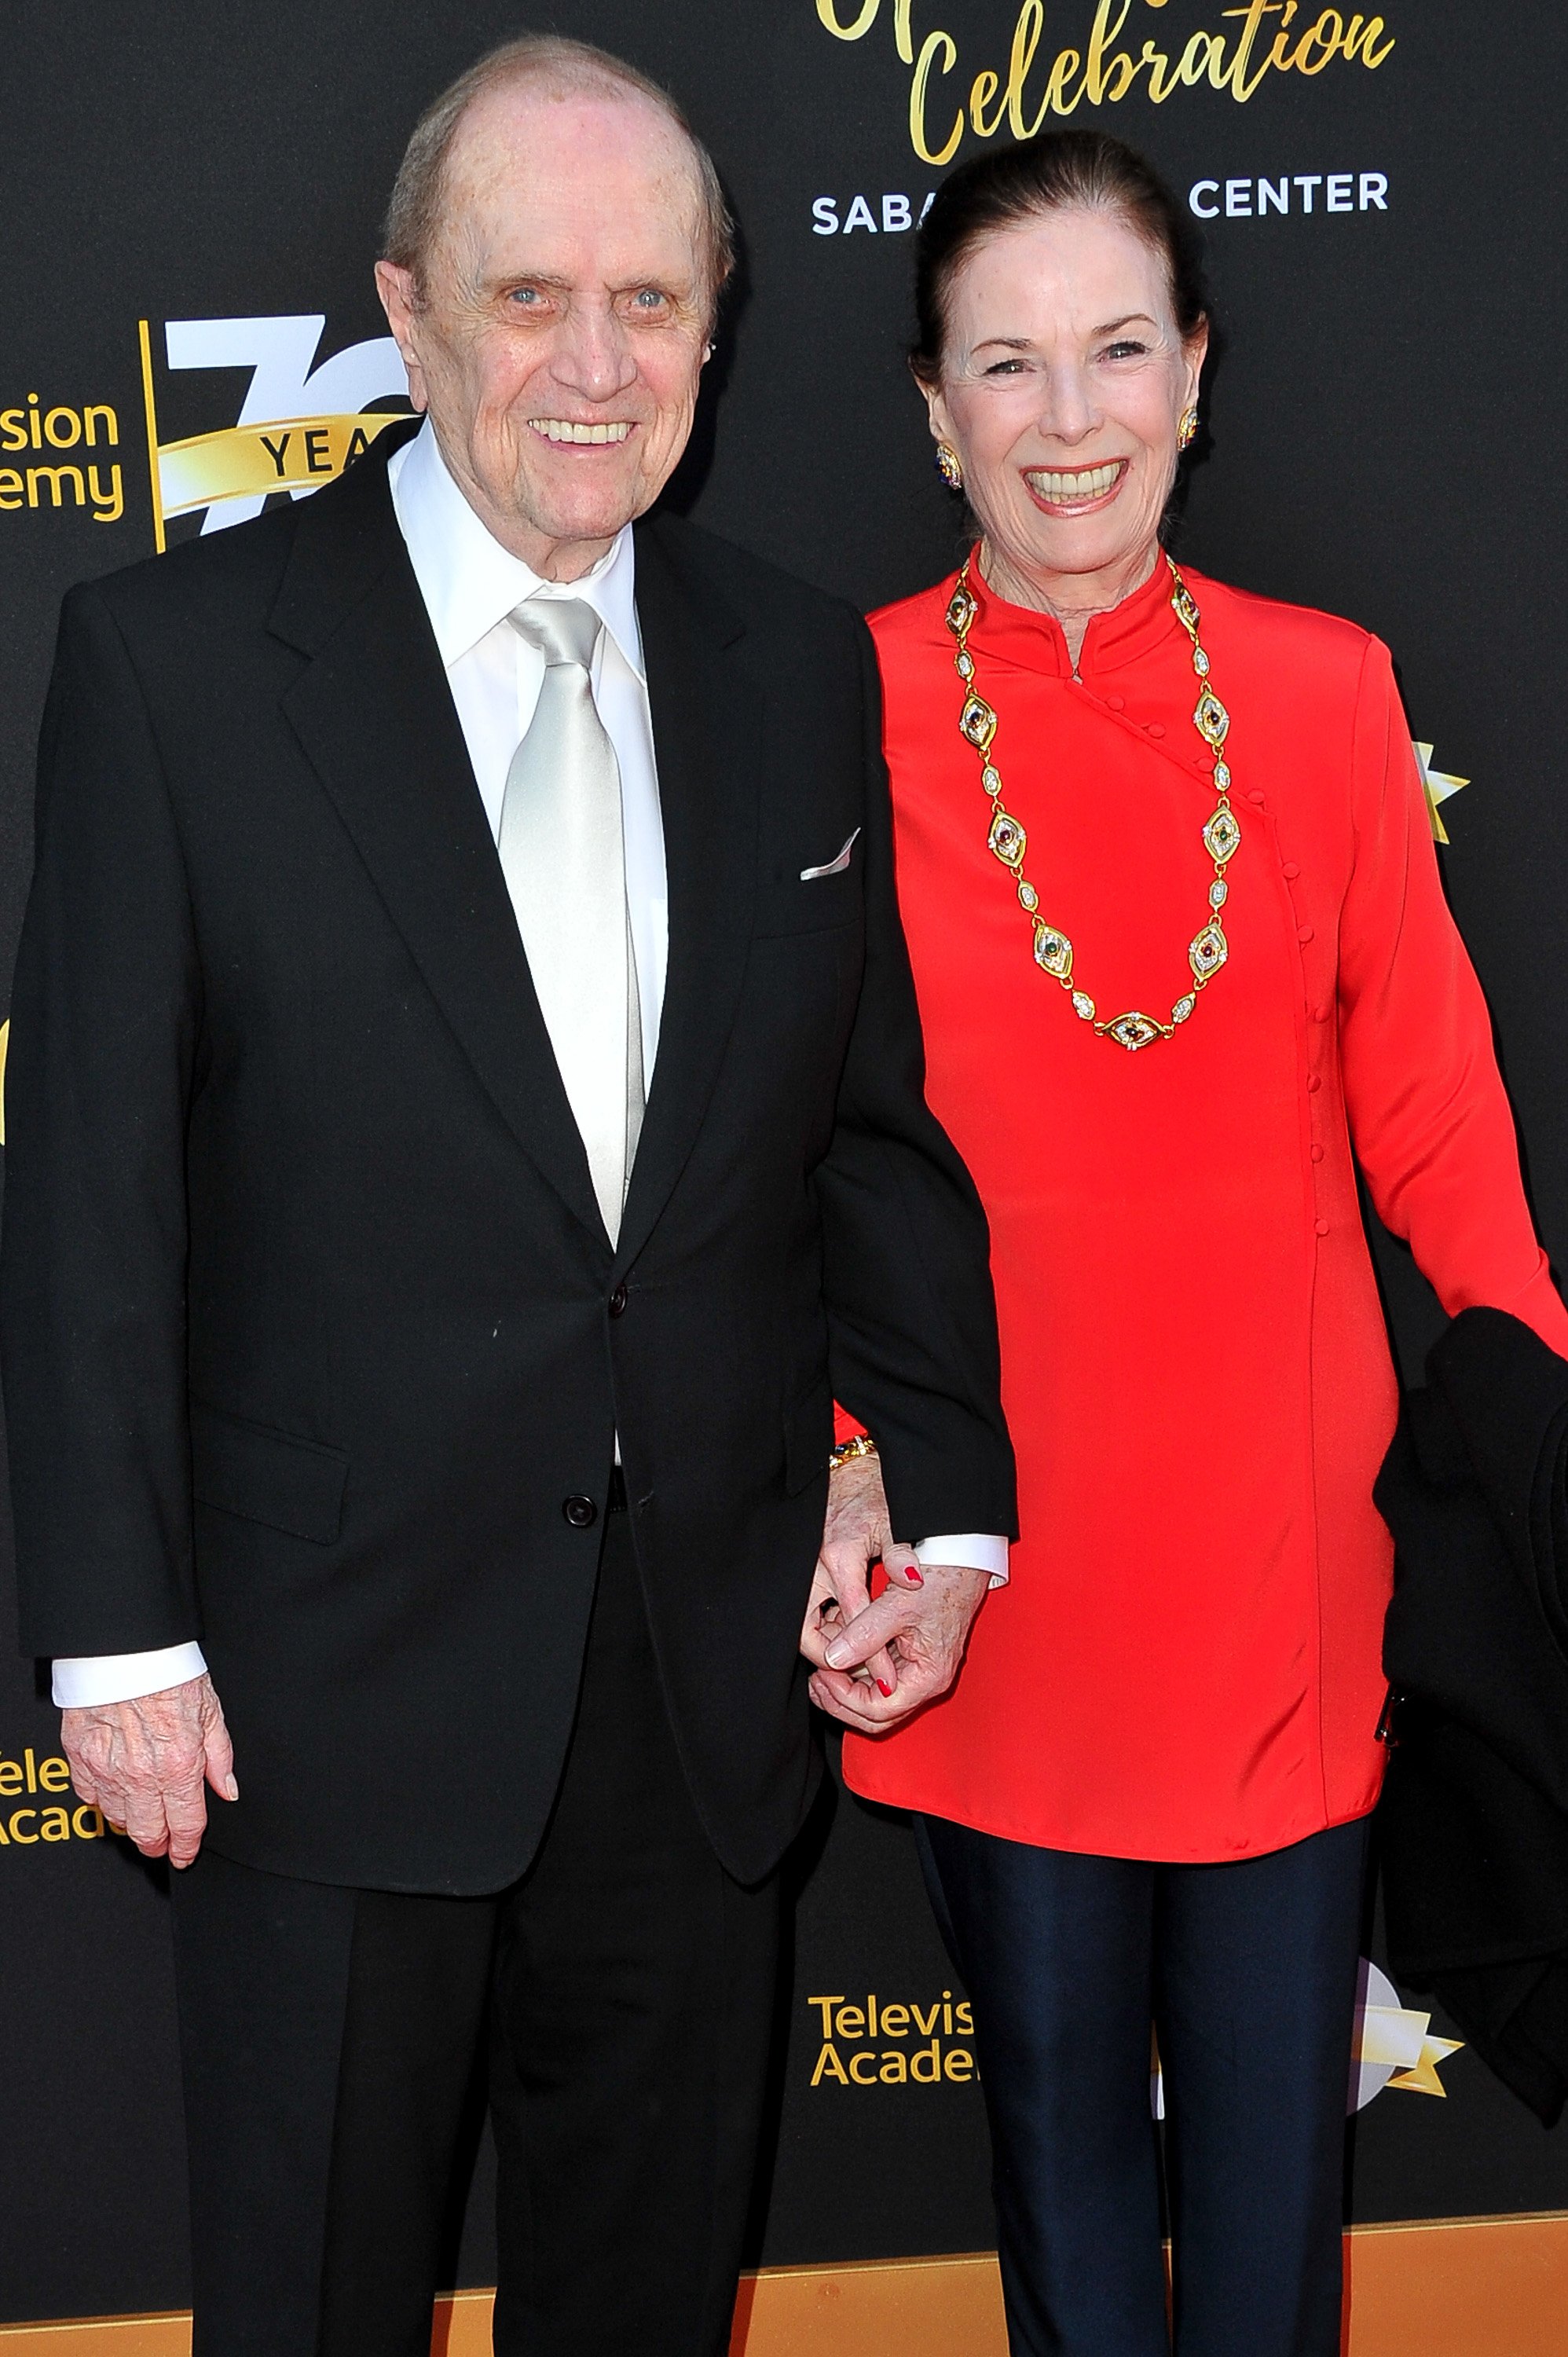 Bob and Ginny Newhart at the Television Academy's 70th Anniversary Gala on June 2, 2016, in Los Angeles, California | Source: Getty Images